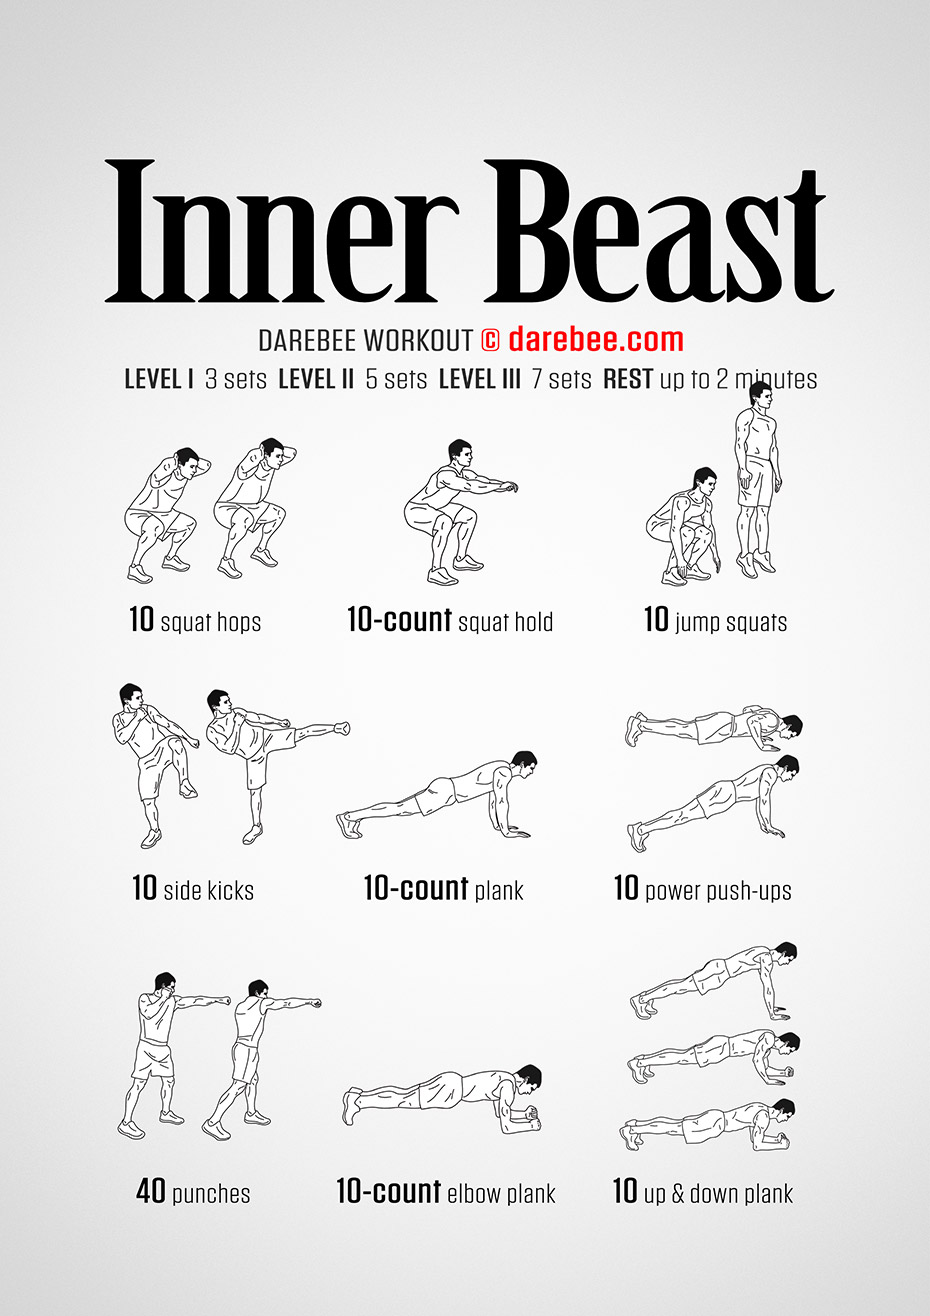 10 Minute The beast workout plan for Gym